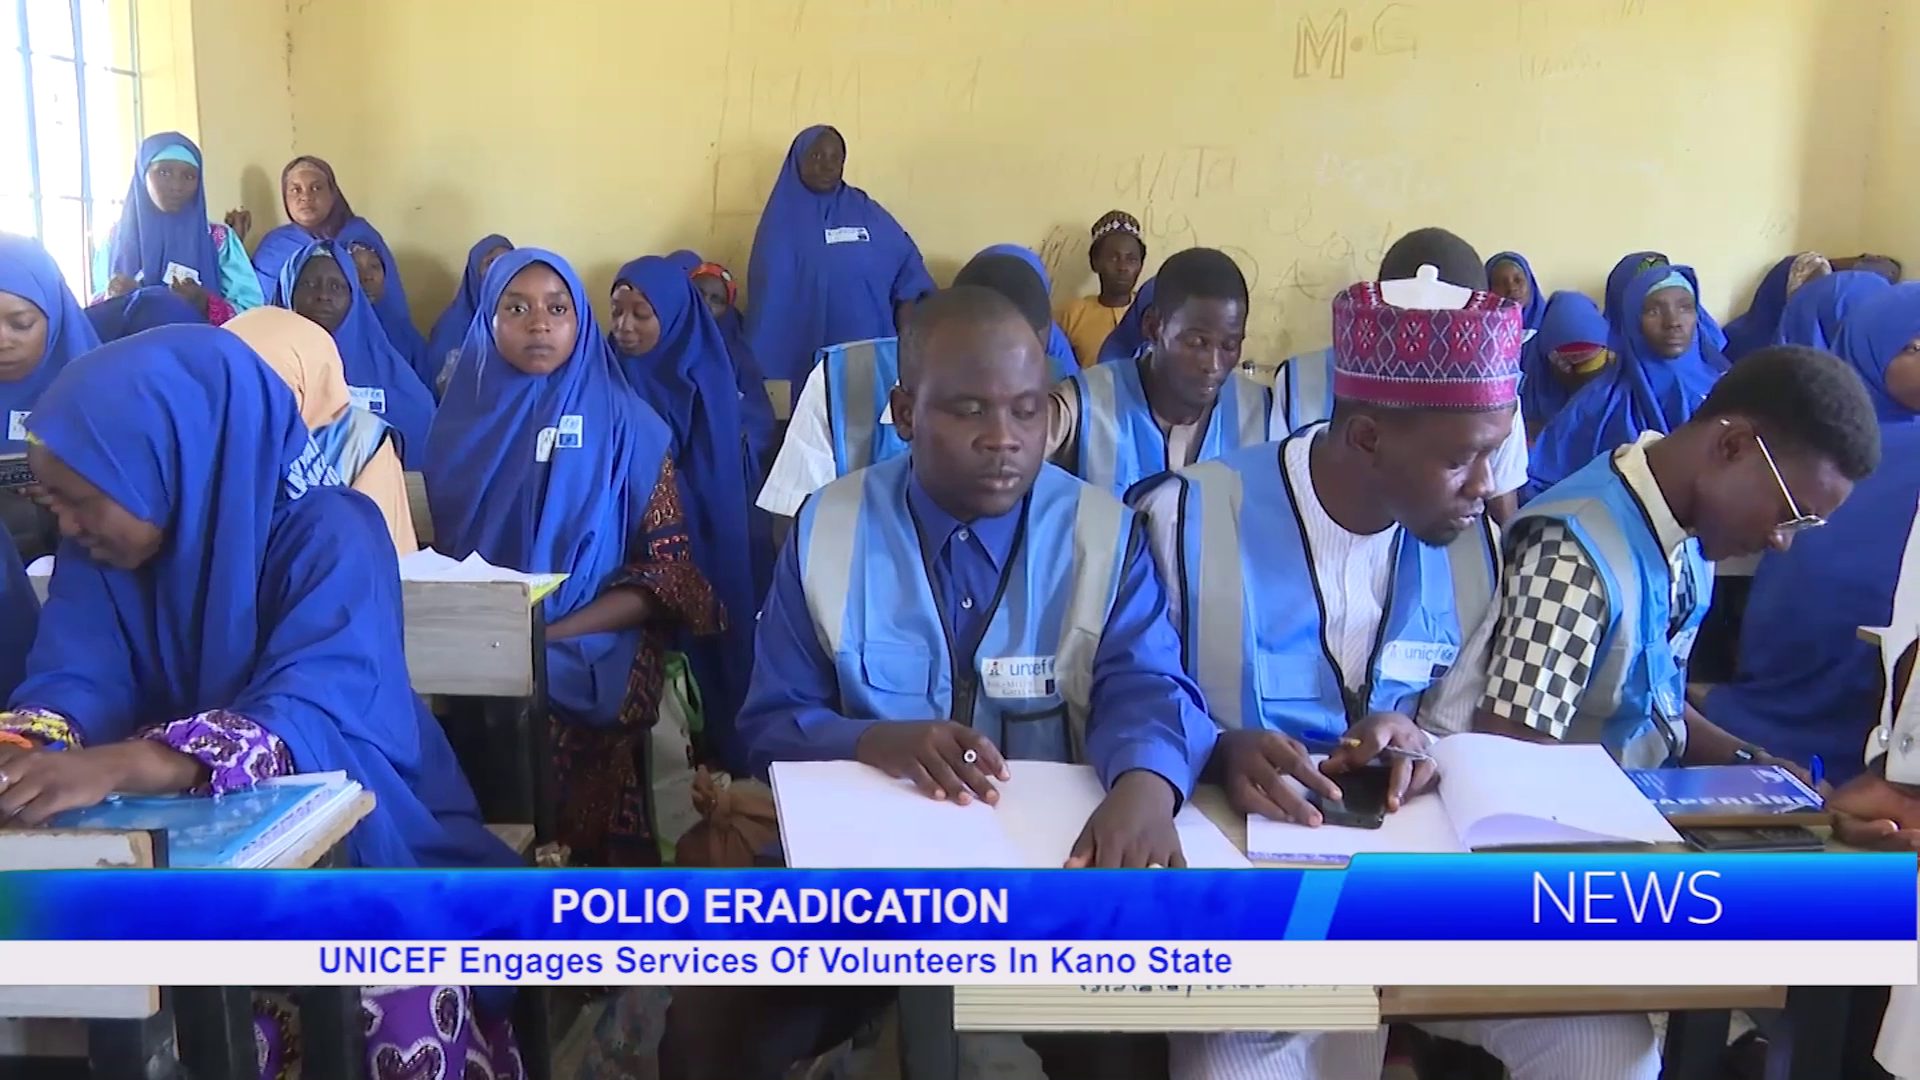 UNICEF Engages Services Of Volunteers for polio eradication In Kano State